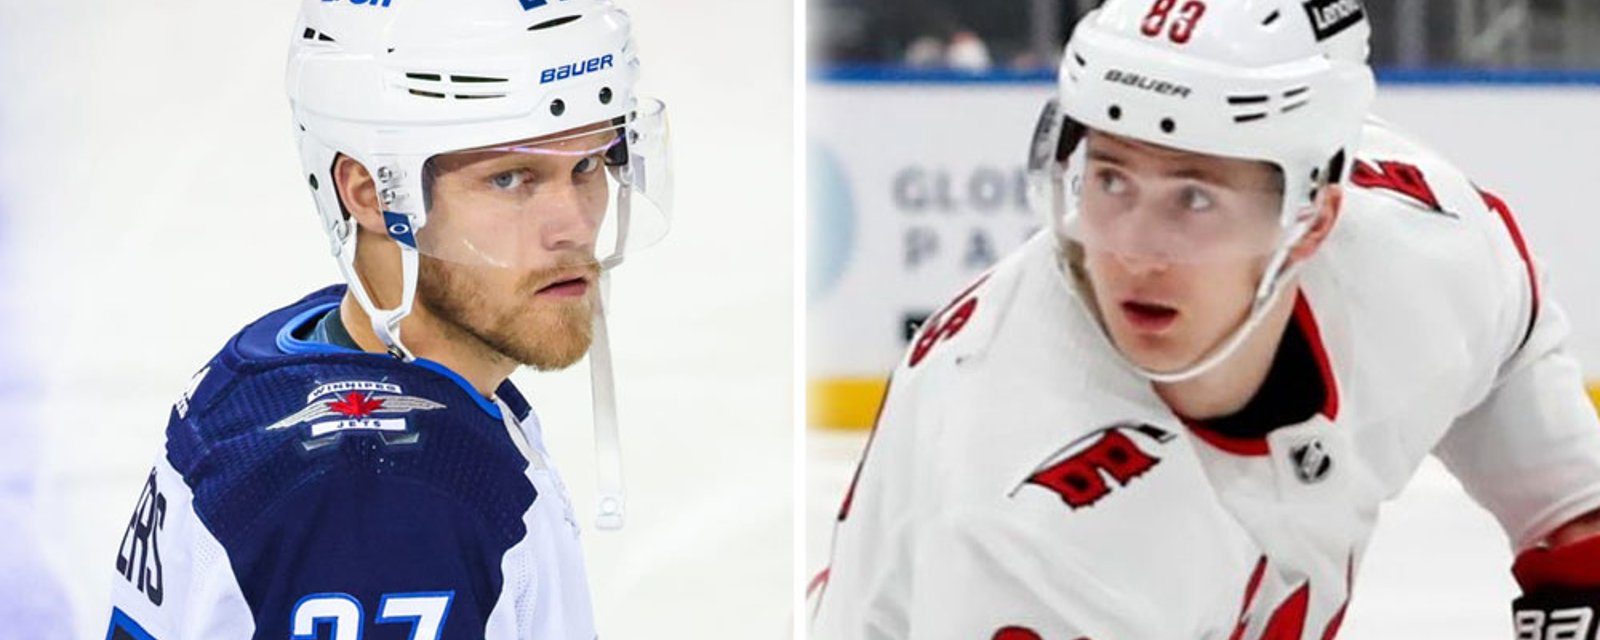 Rumor: Both Ehlers and Necas traded to Canadian NHL team?